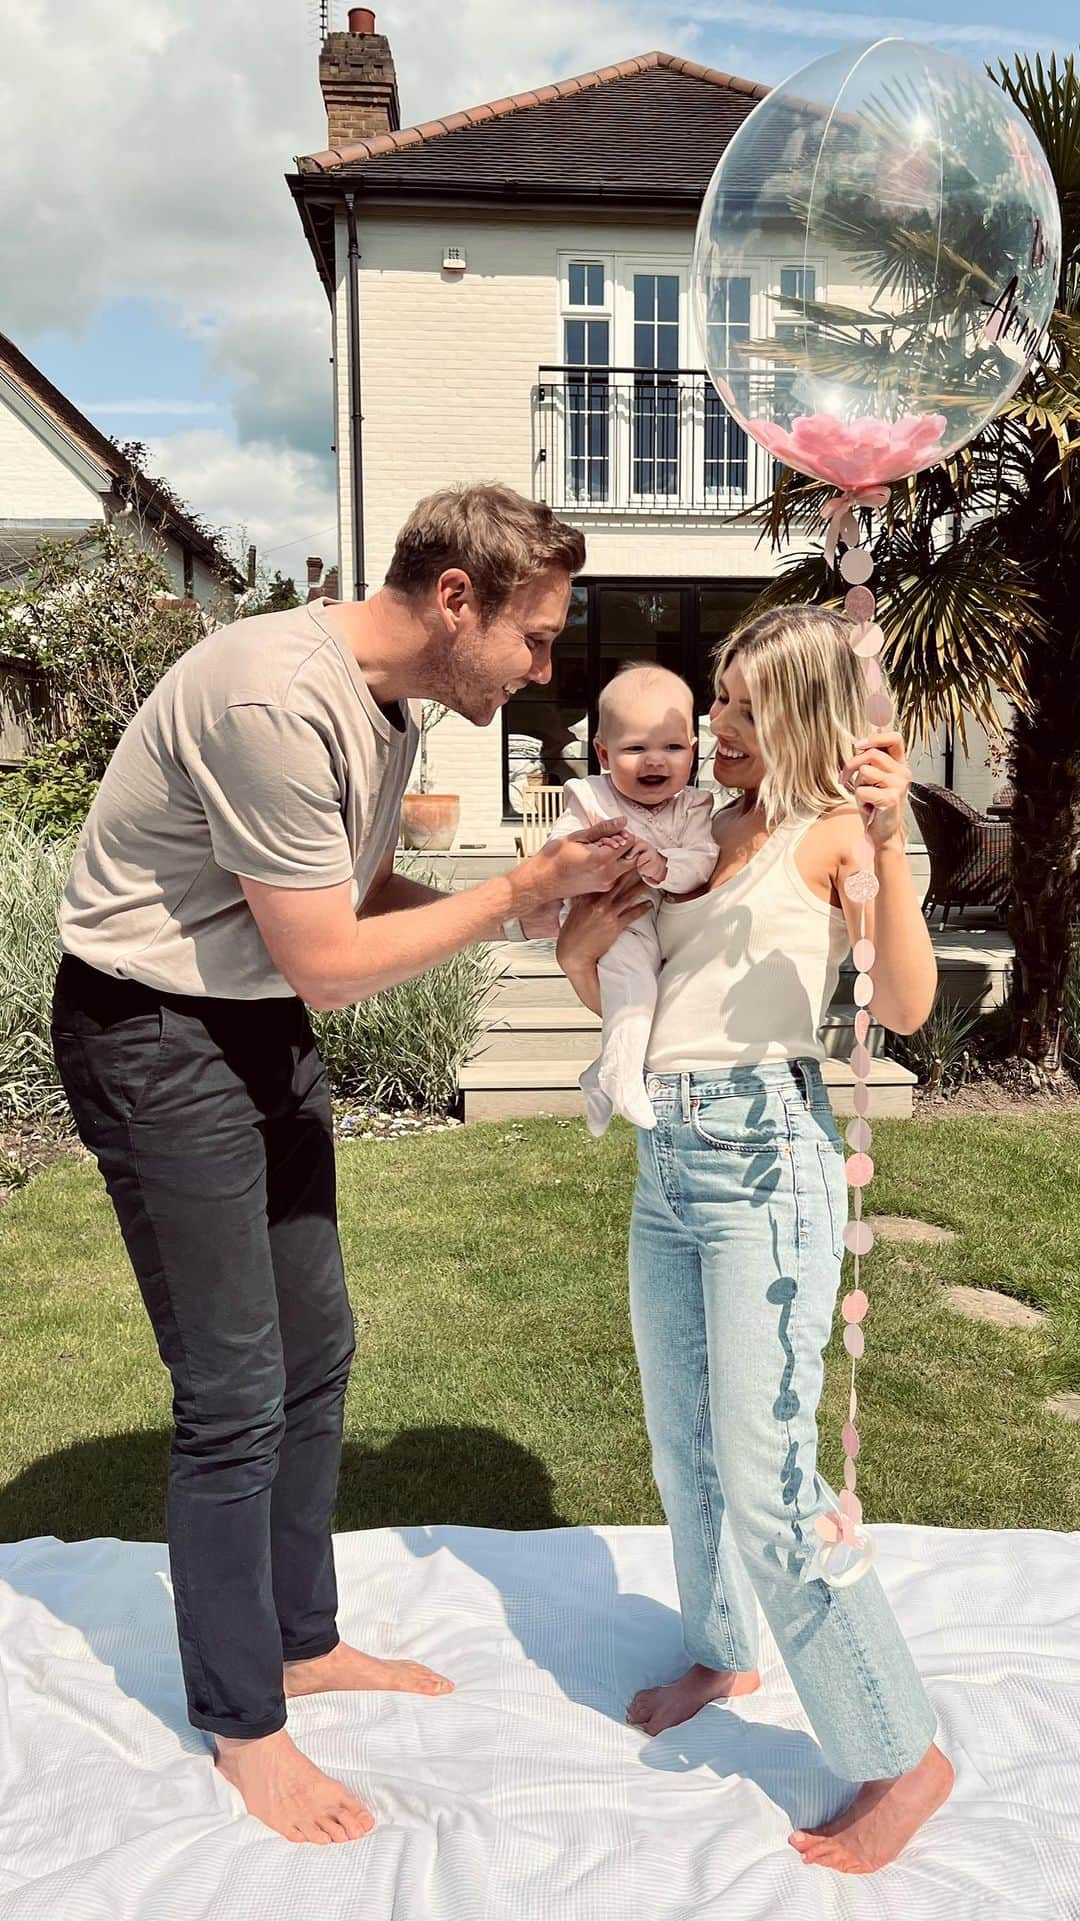 Mollie Kingのインスタグラム：「Last week we celebrated 6 months of our beautiful girl ❤️ Annabella, you’ve brought magic into our lives. Every day we learn something new about you and your wonderful little personality and we can’t wait to see you continue to blossom. We will be there with you every step of the way, darling girl.」